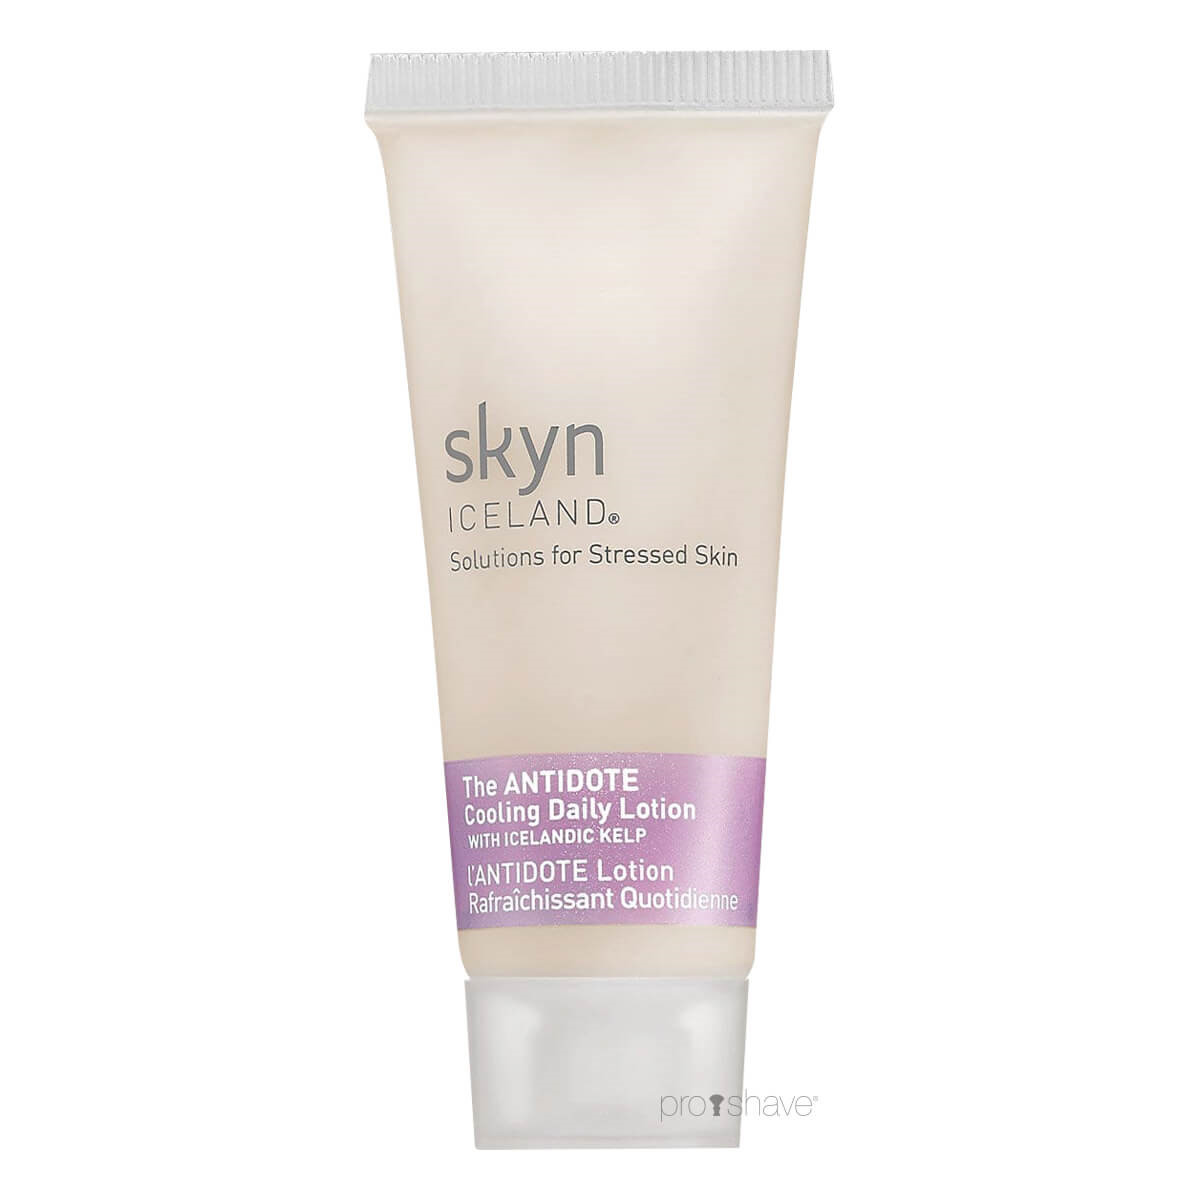 Skyn Iceland The ANTIDOTE Cooling Daily Lotion, Rejsestørrelse, 15 ml.